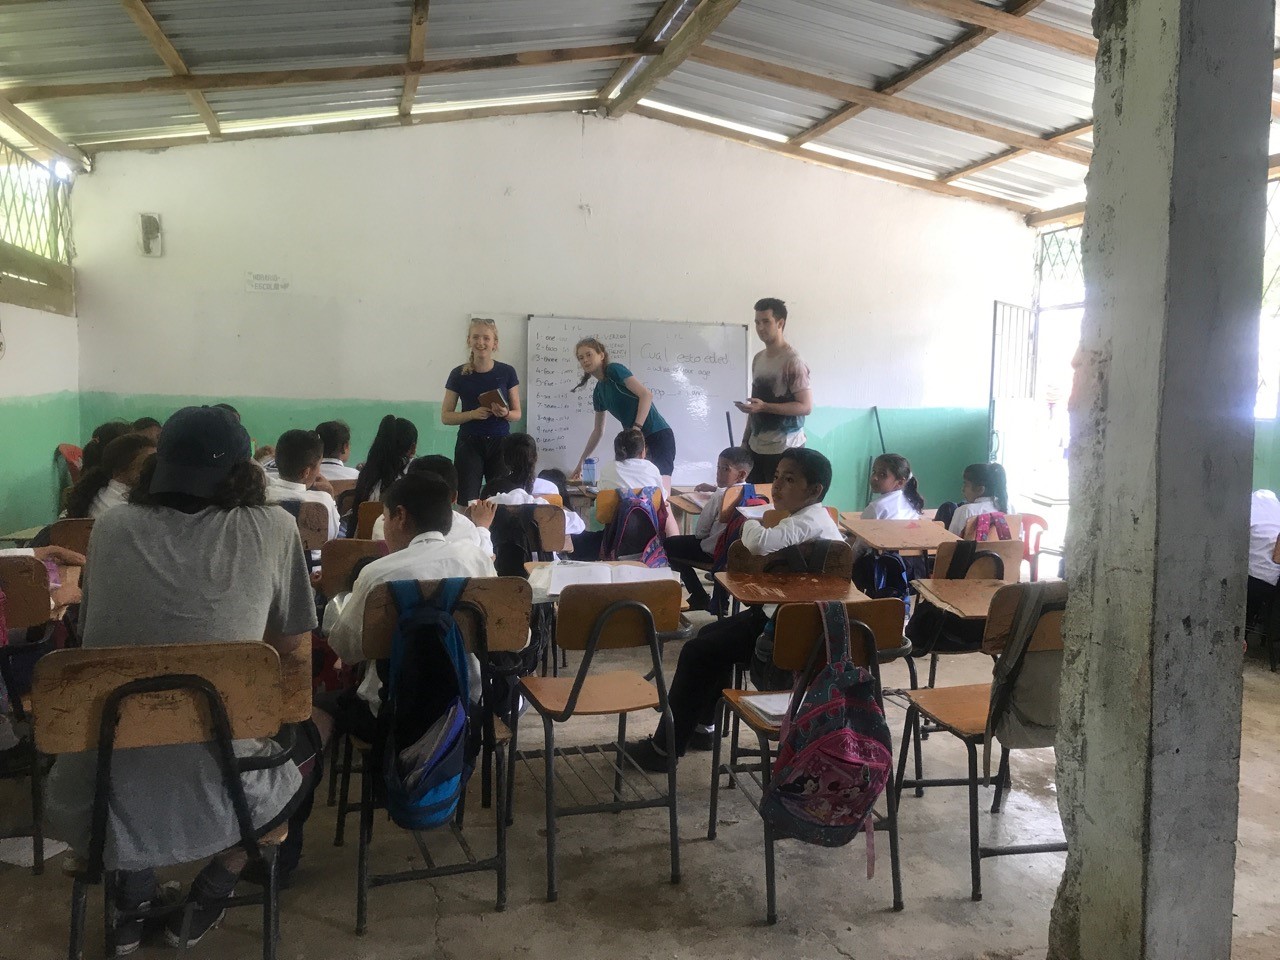 A classroom full of children and teachers at the front